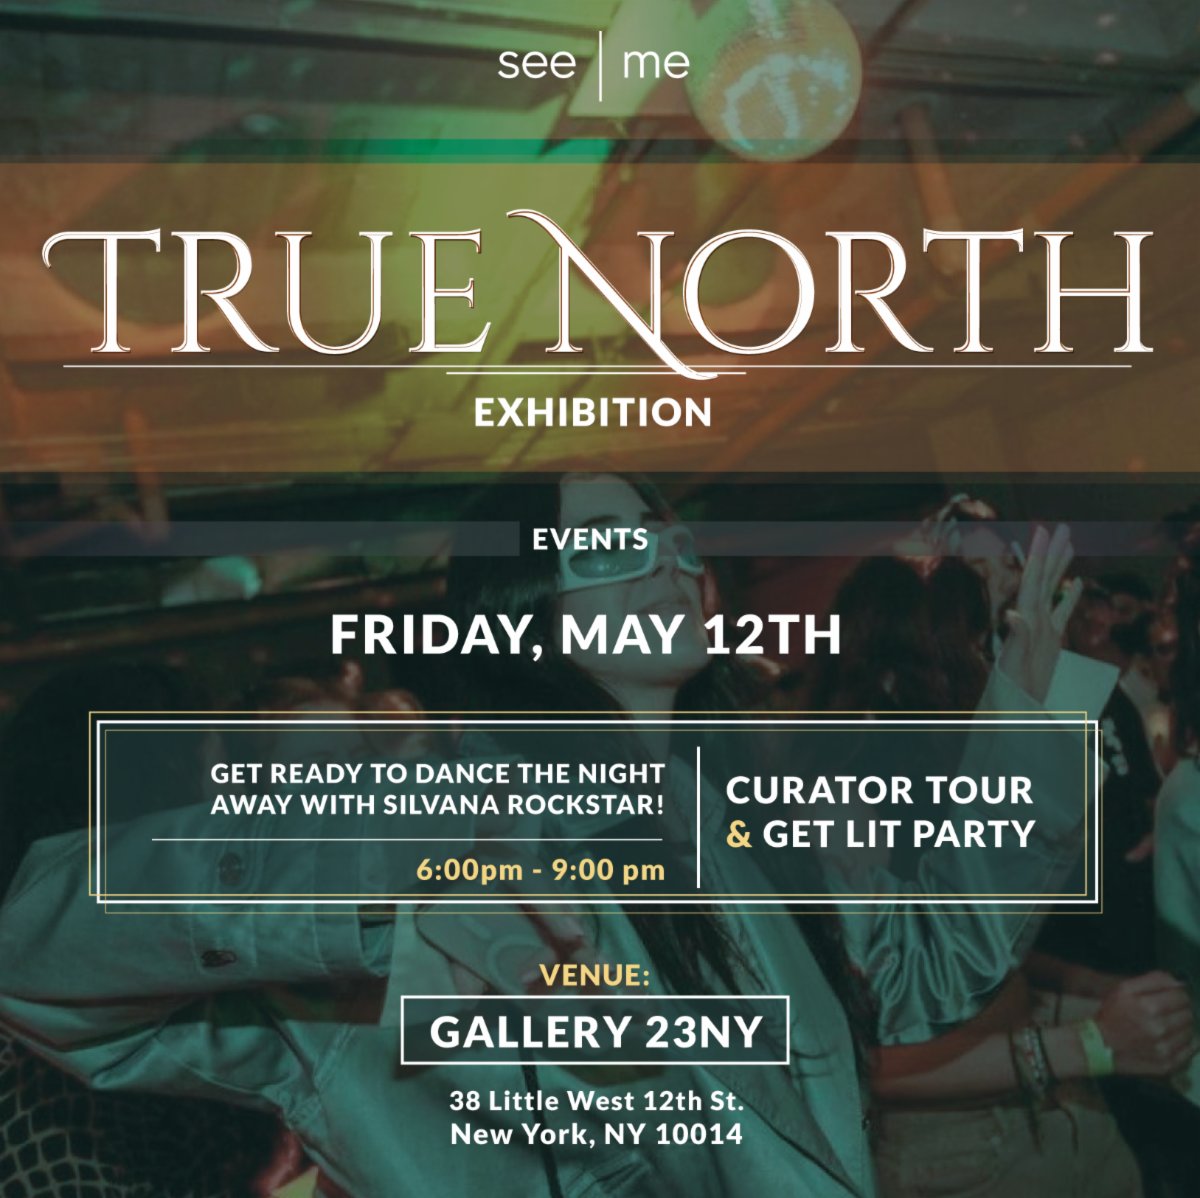 💃Get ready to dance the night away with Silvana Rockstar!
🕺Join us on Friday the 12th at @gallery23NY, In the Frame of True North Exhibition for a night of music, art, and good vibes. 
#seemecommunity #NewYorkEvents #NewYork #art #exhibition #gallery23ny